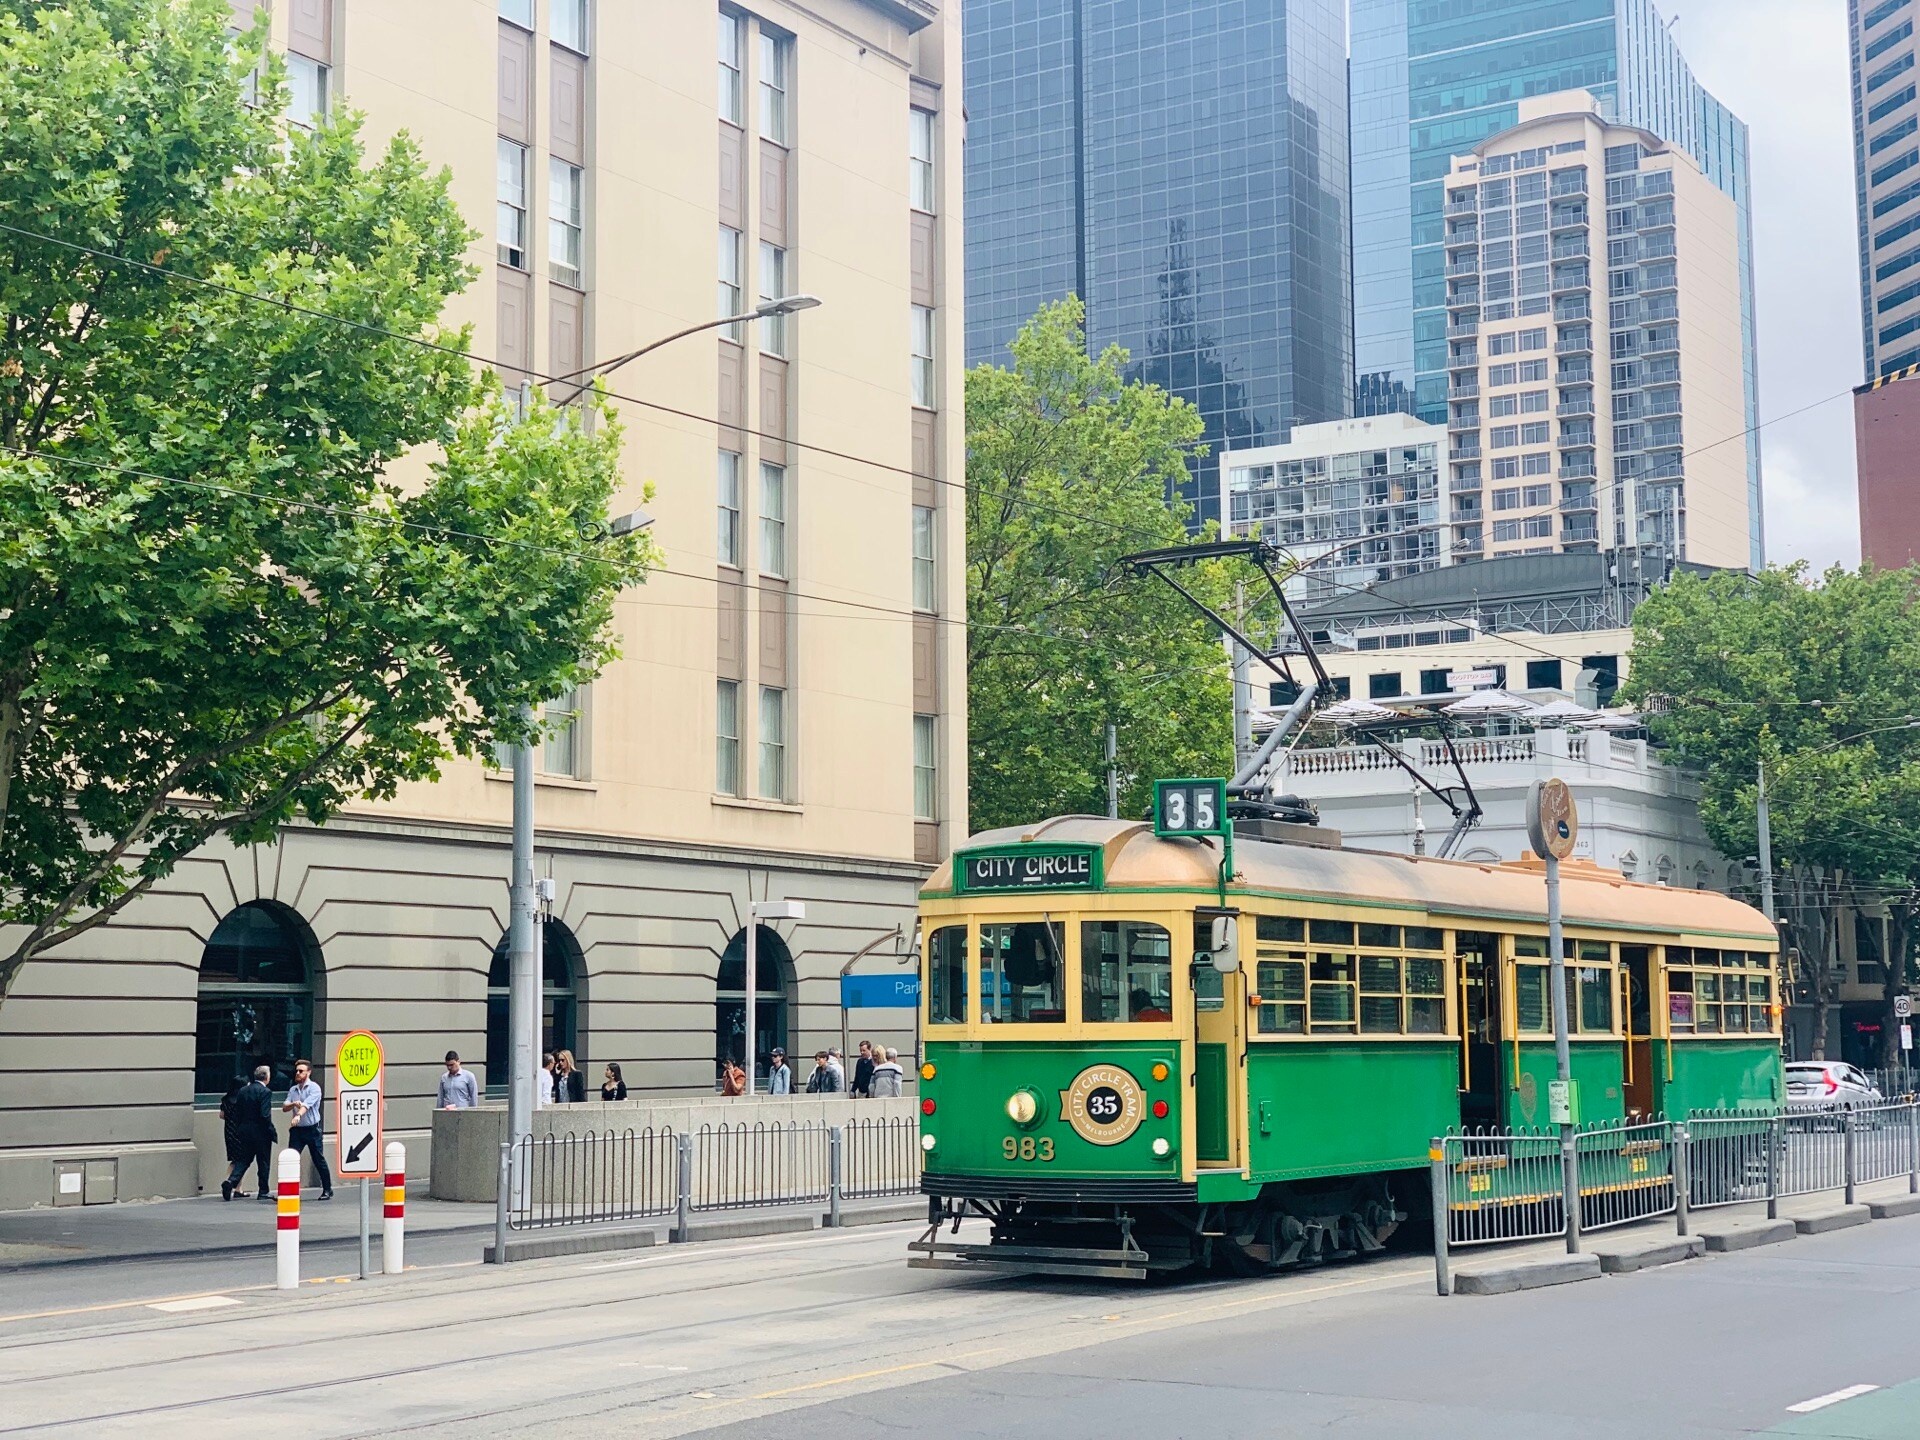 City Circle Tram, Melbourne attraction, Free transportation, Nearby hotels and food, 1920x1440 HD Desktop